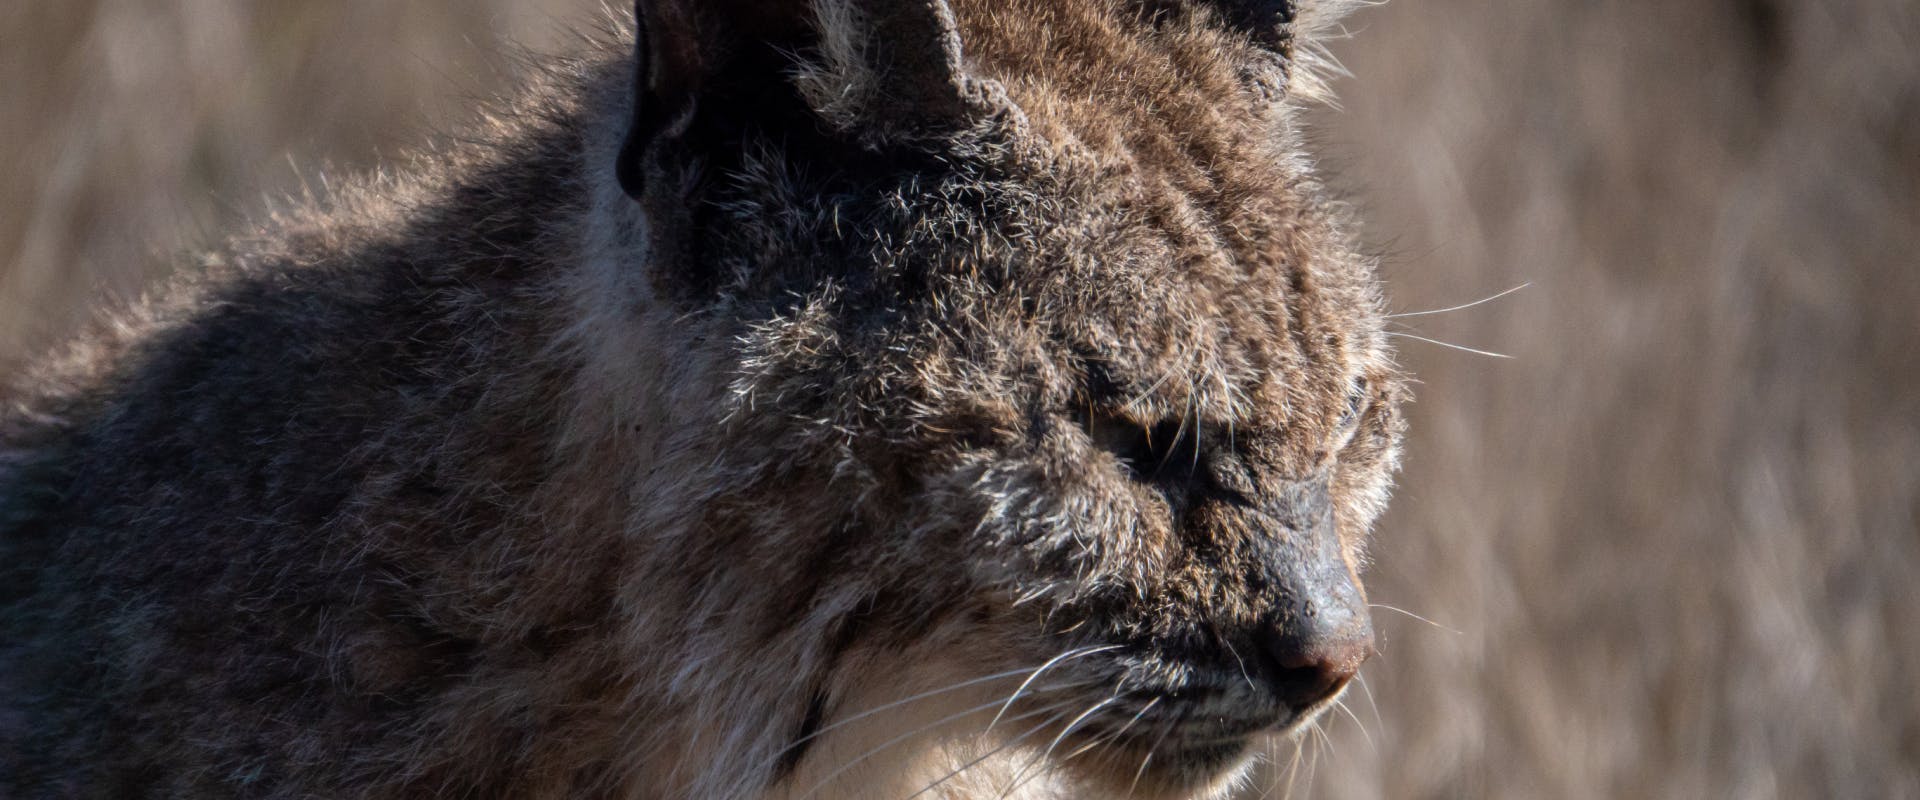 a tabby cat with mange on its face near its eyes